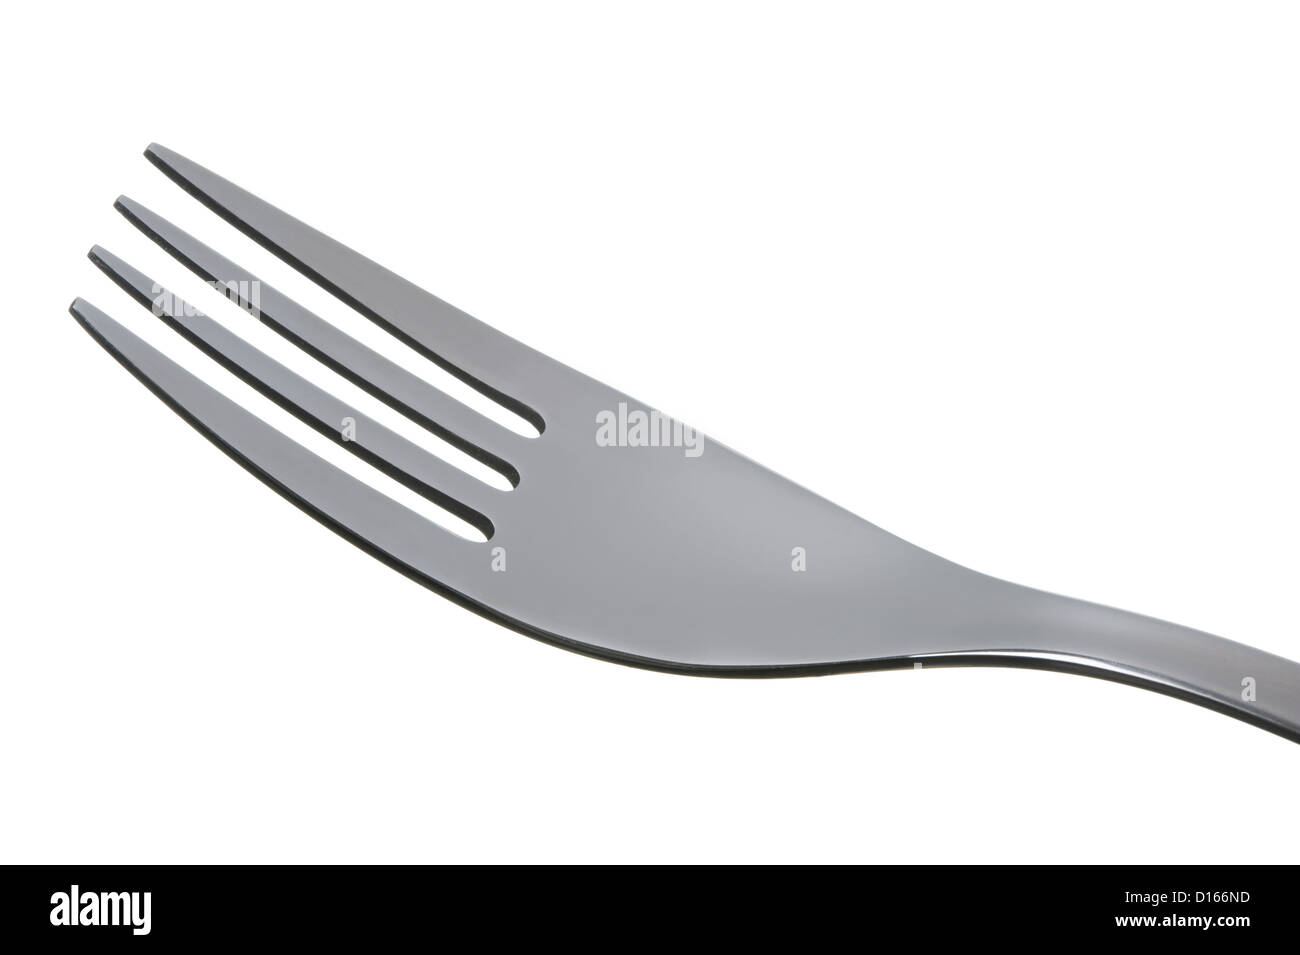 close up of a stainless steel cutlery fork isolated against a white background Stock Photo